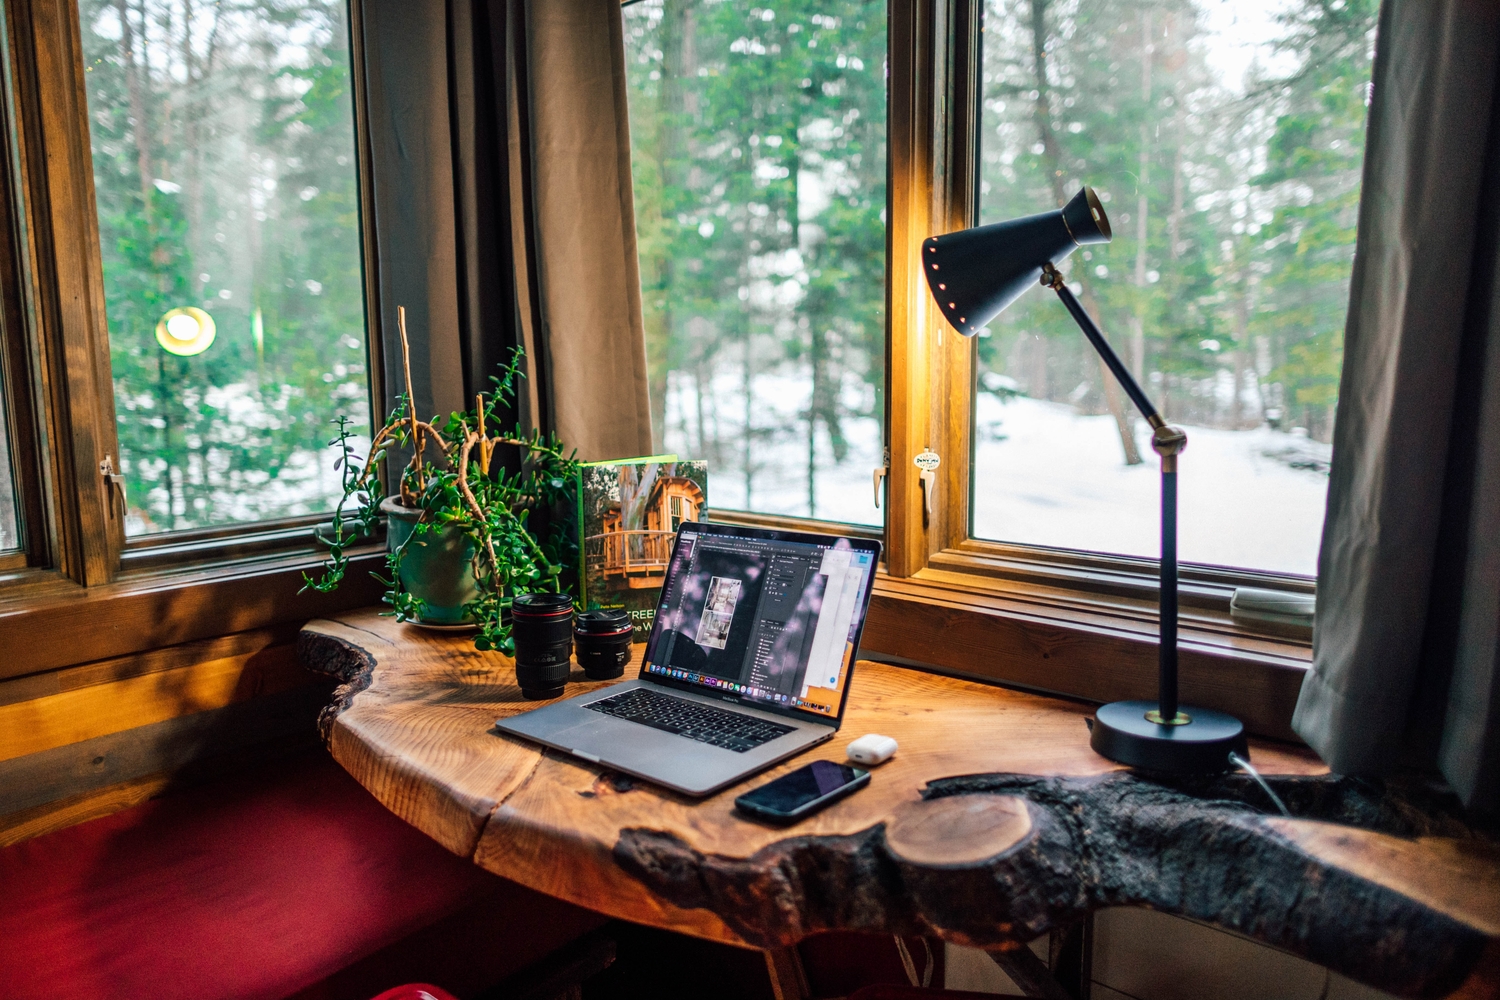 How to Work From Home Without Working All the Time